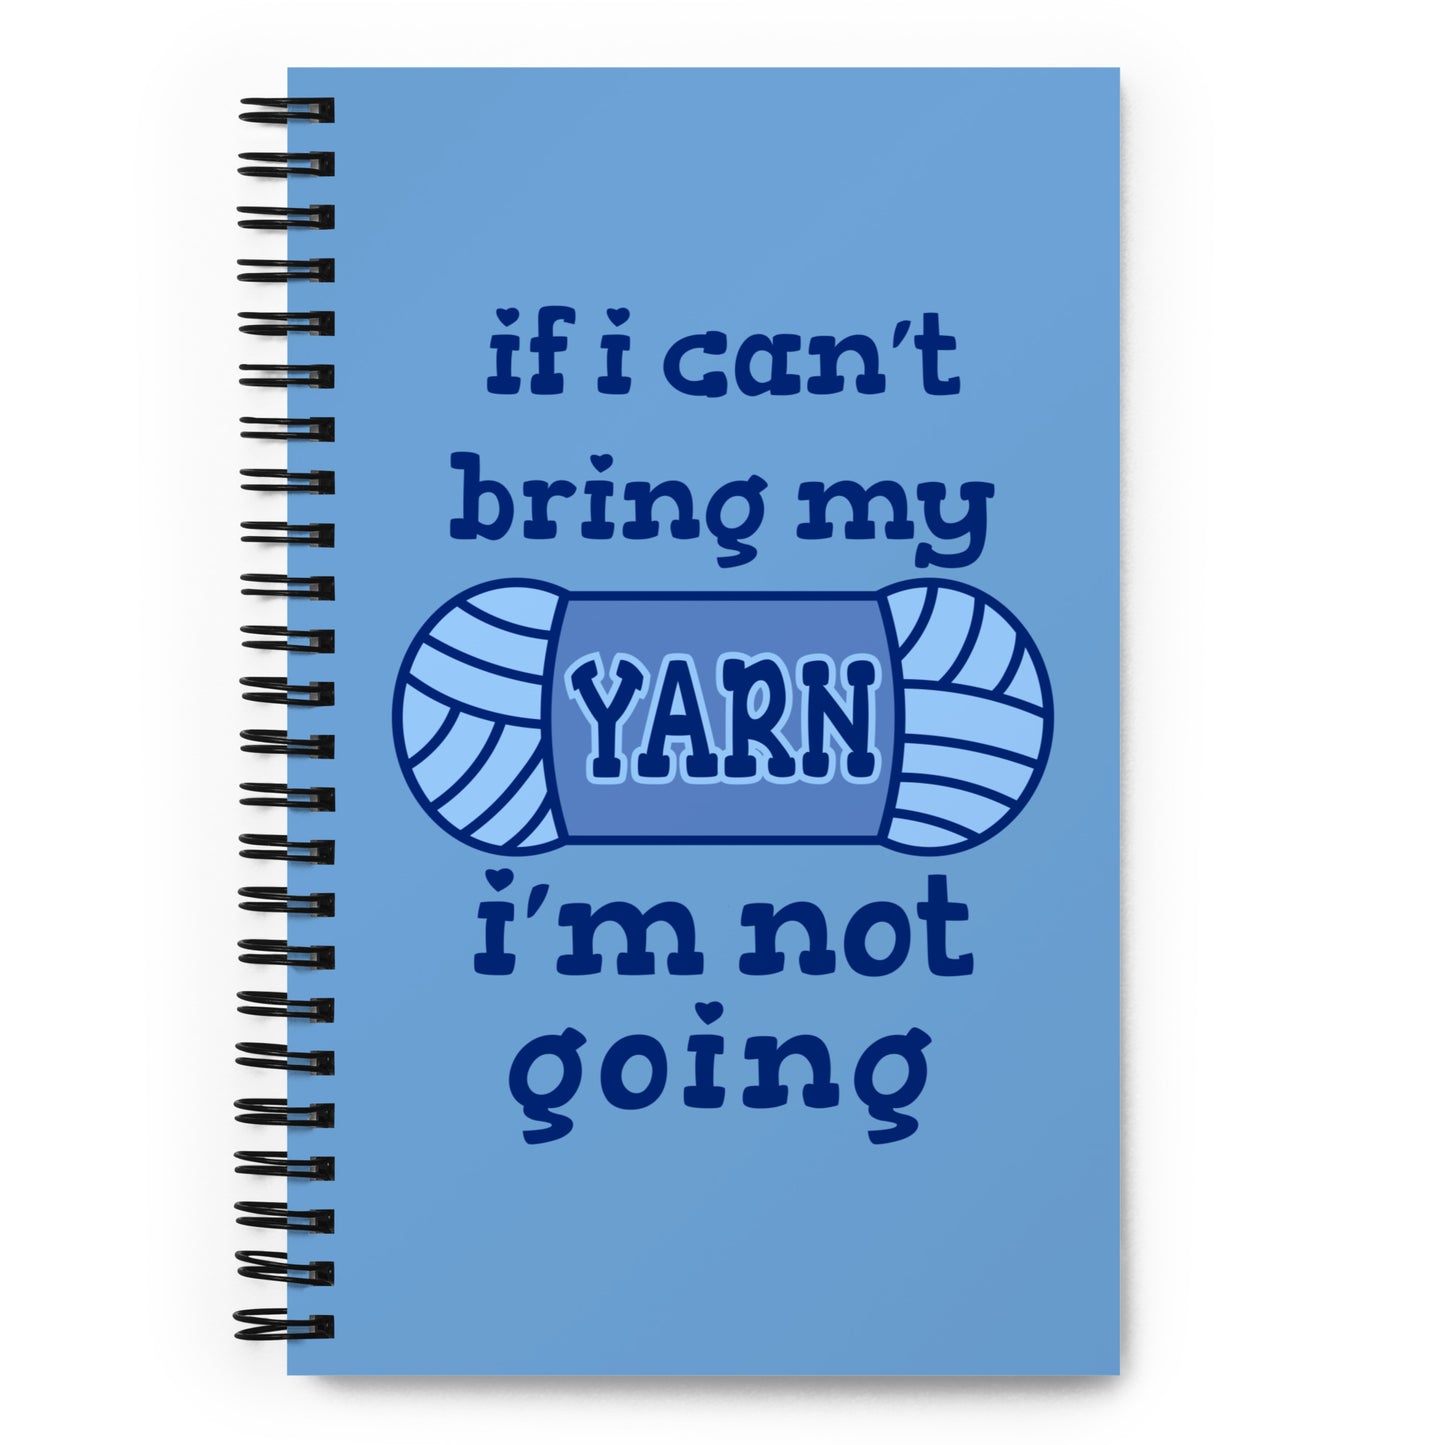 A blue wire-bound notebook with text reading "If I can't bring my yarn, I'm not going". The word "yarn" is centered on an illustration of a skein of yarn.